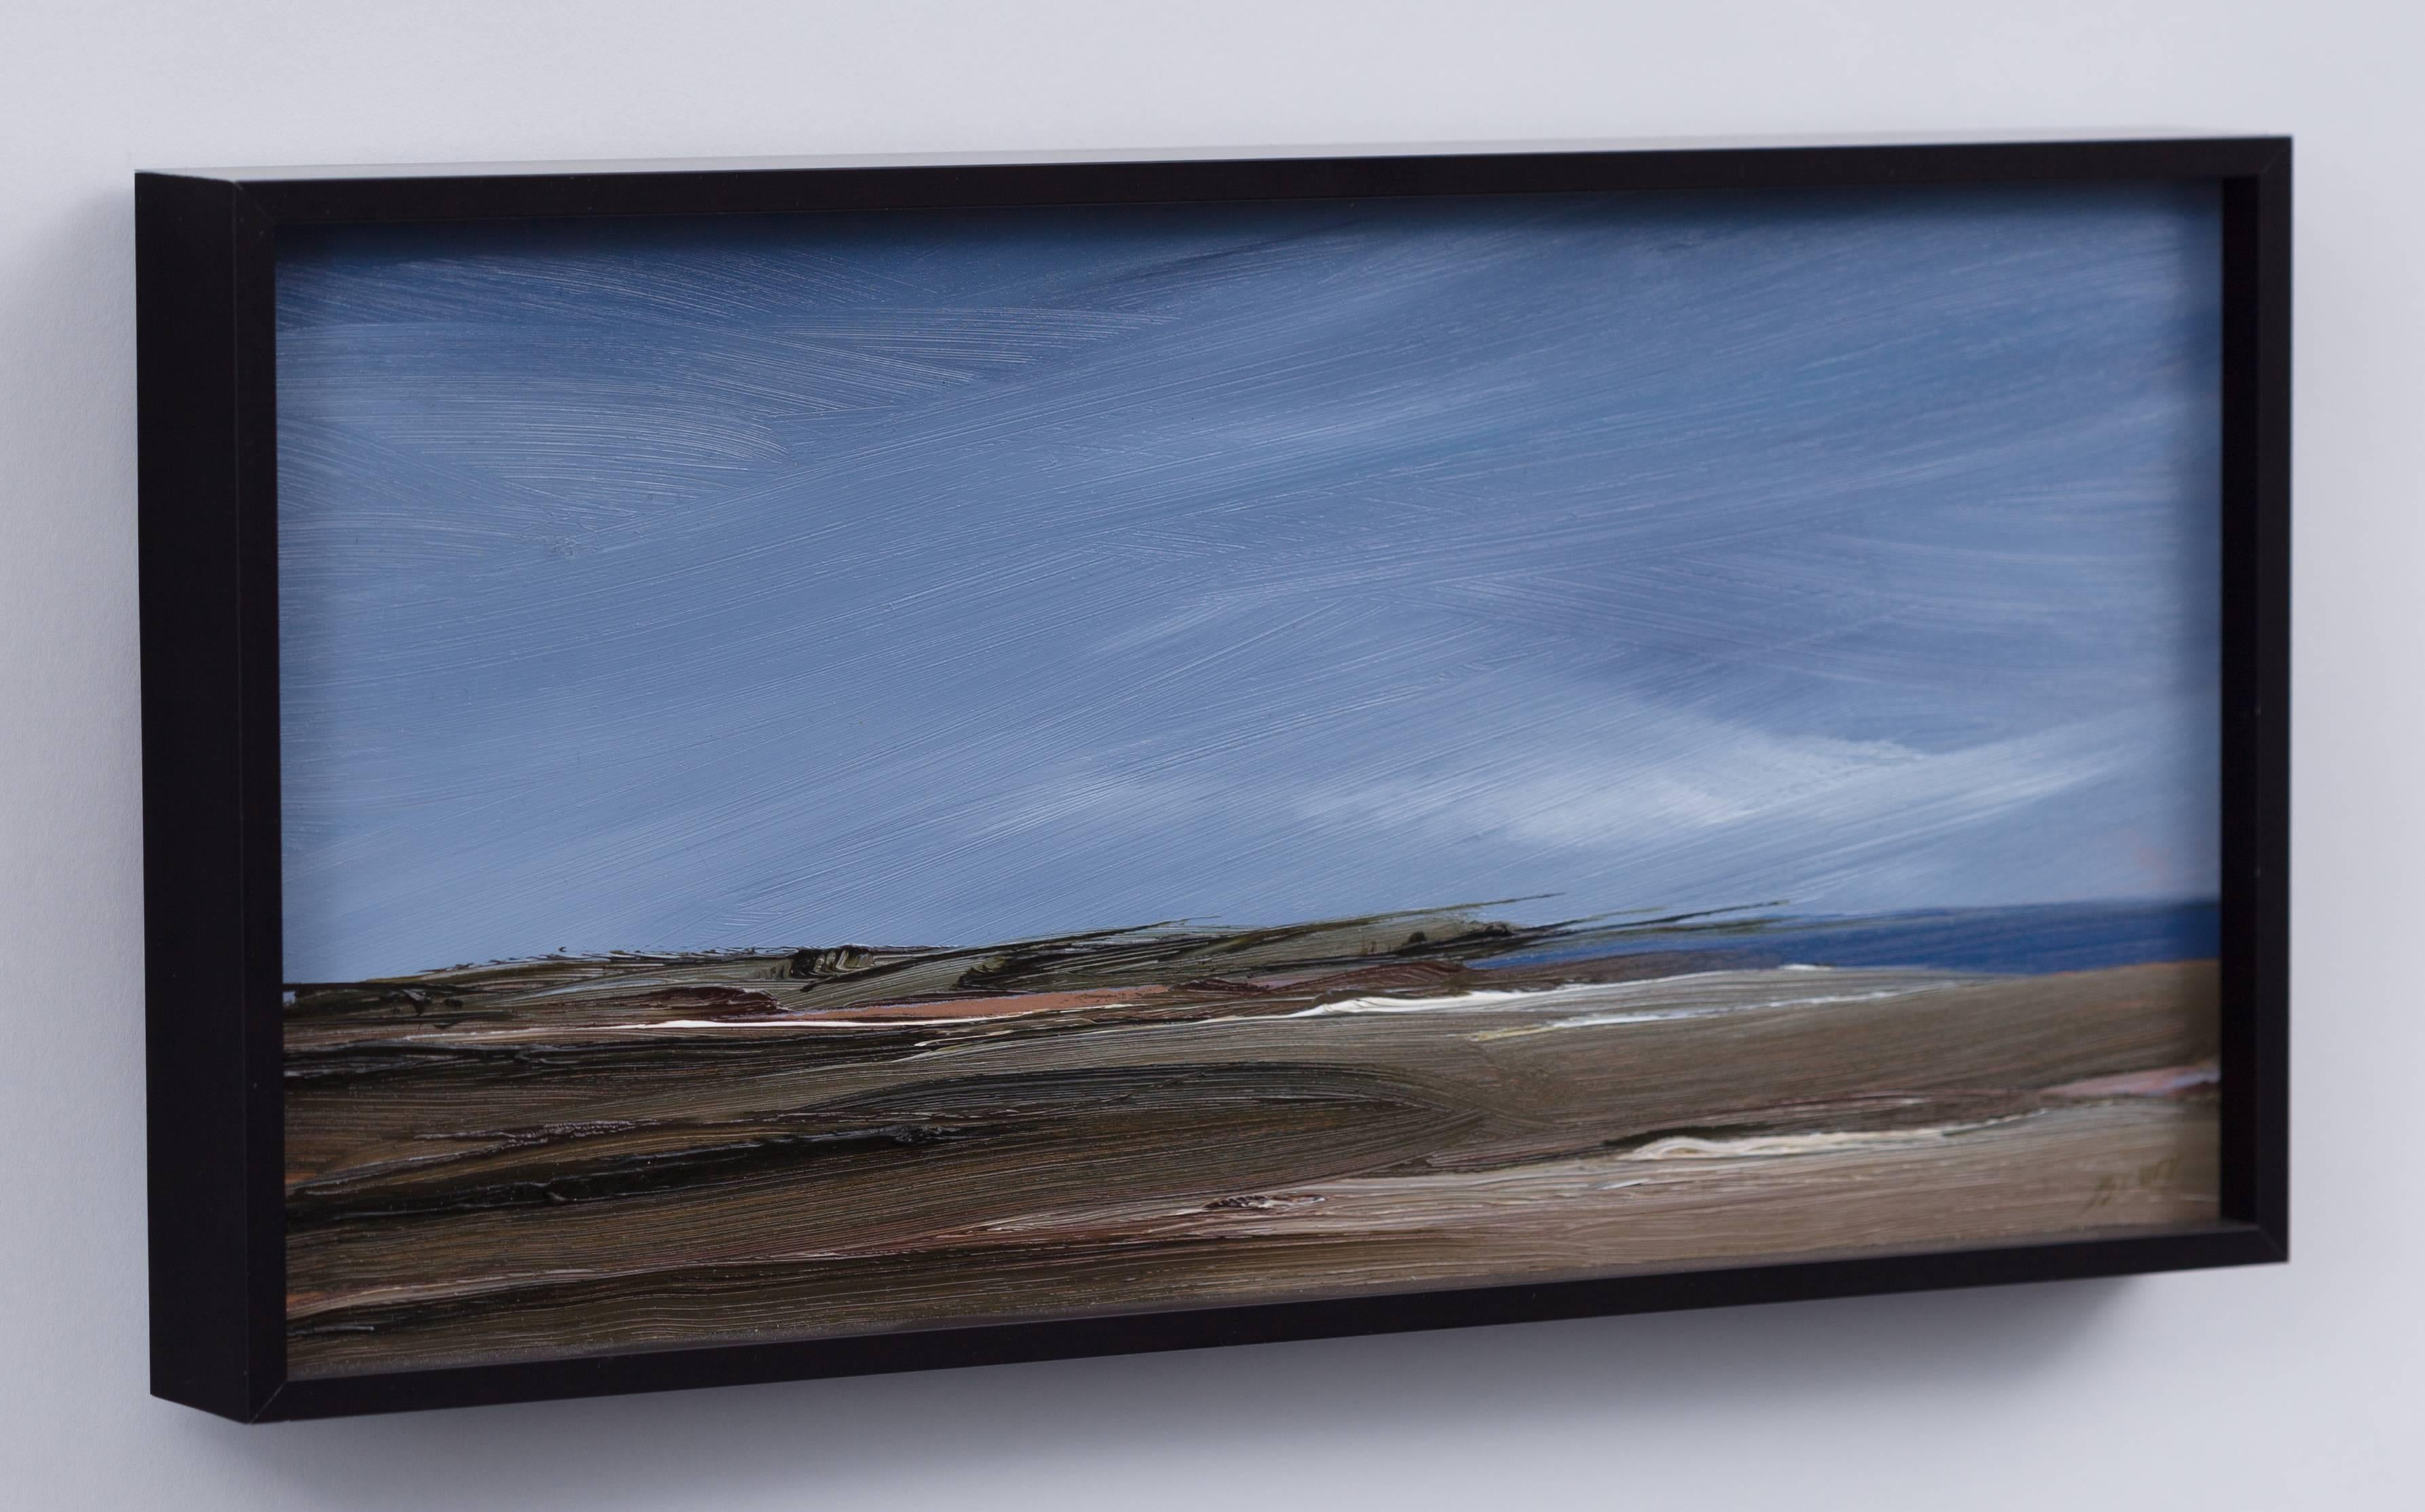 Pace, First Encounter on Eastham - Seascape Painting on Copper 6